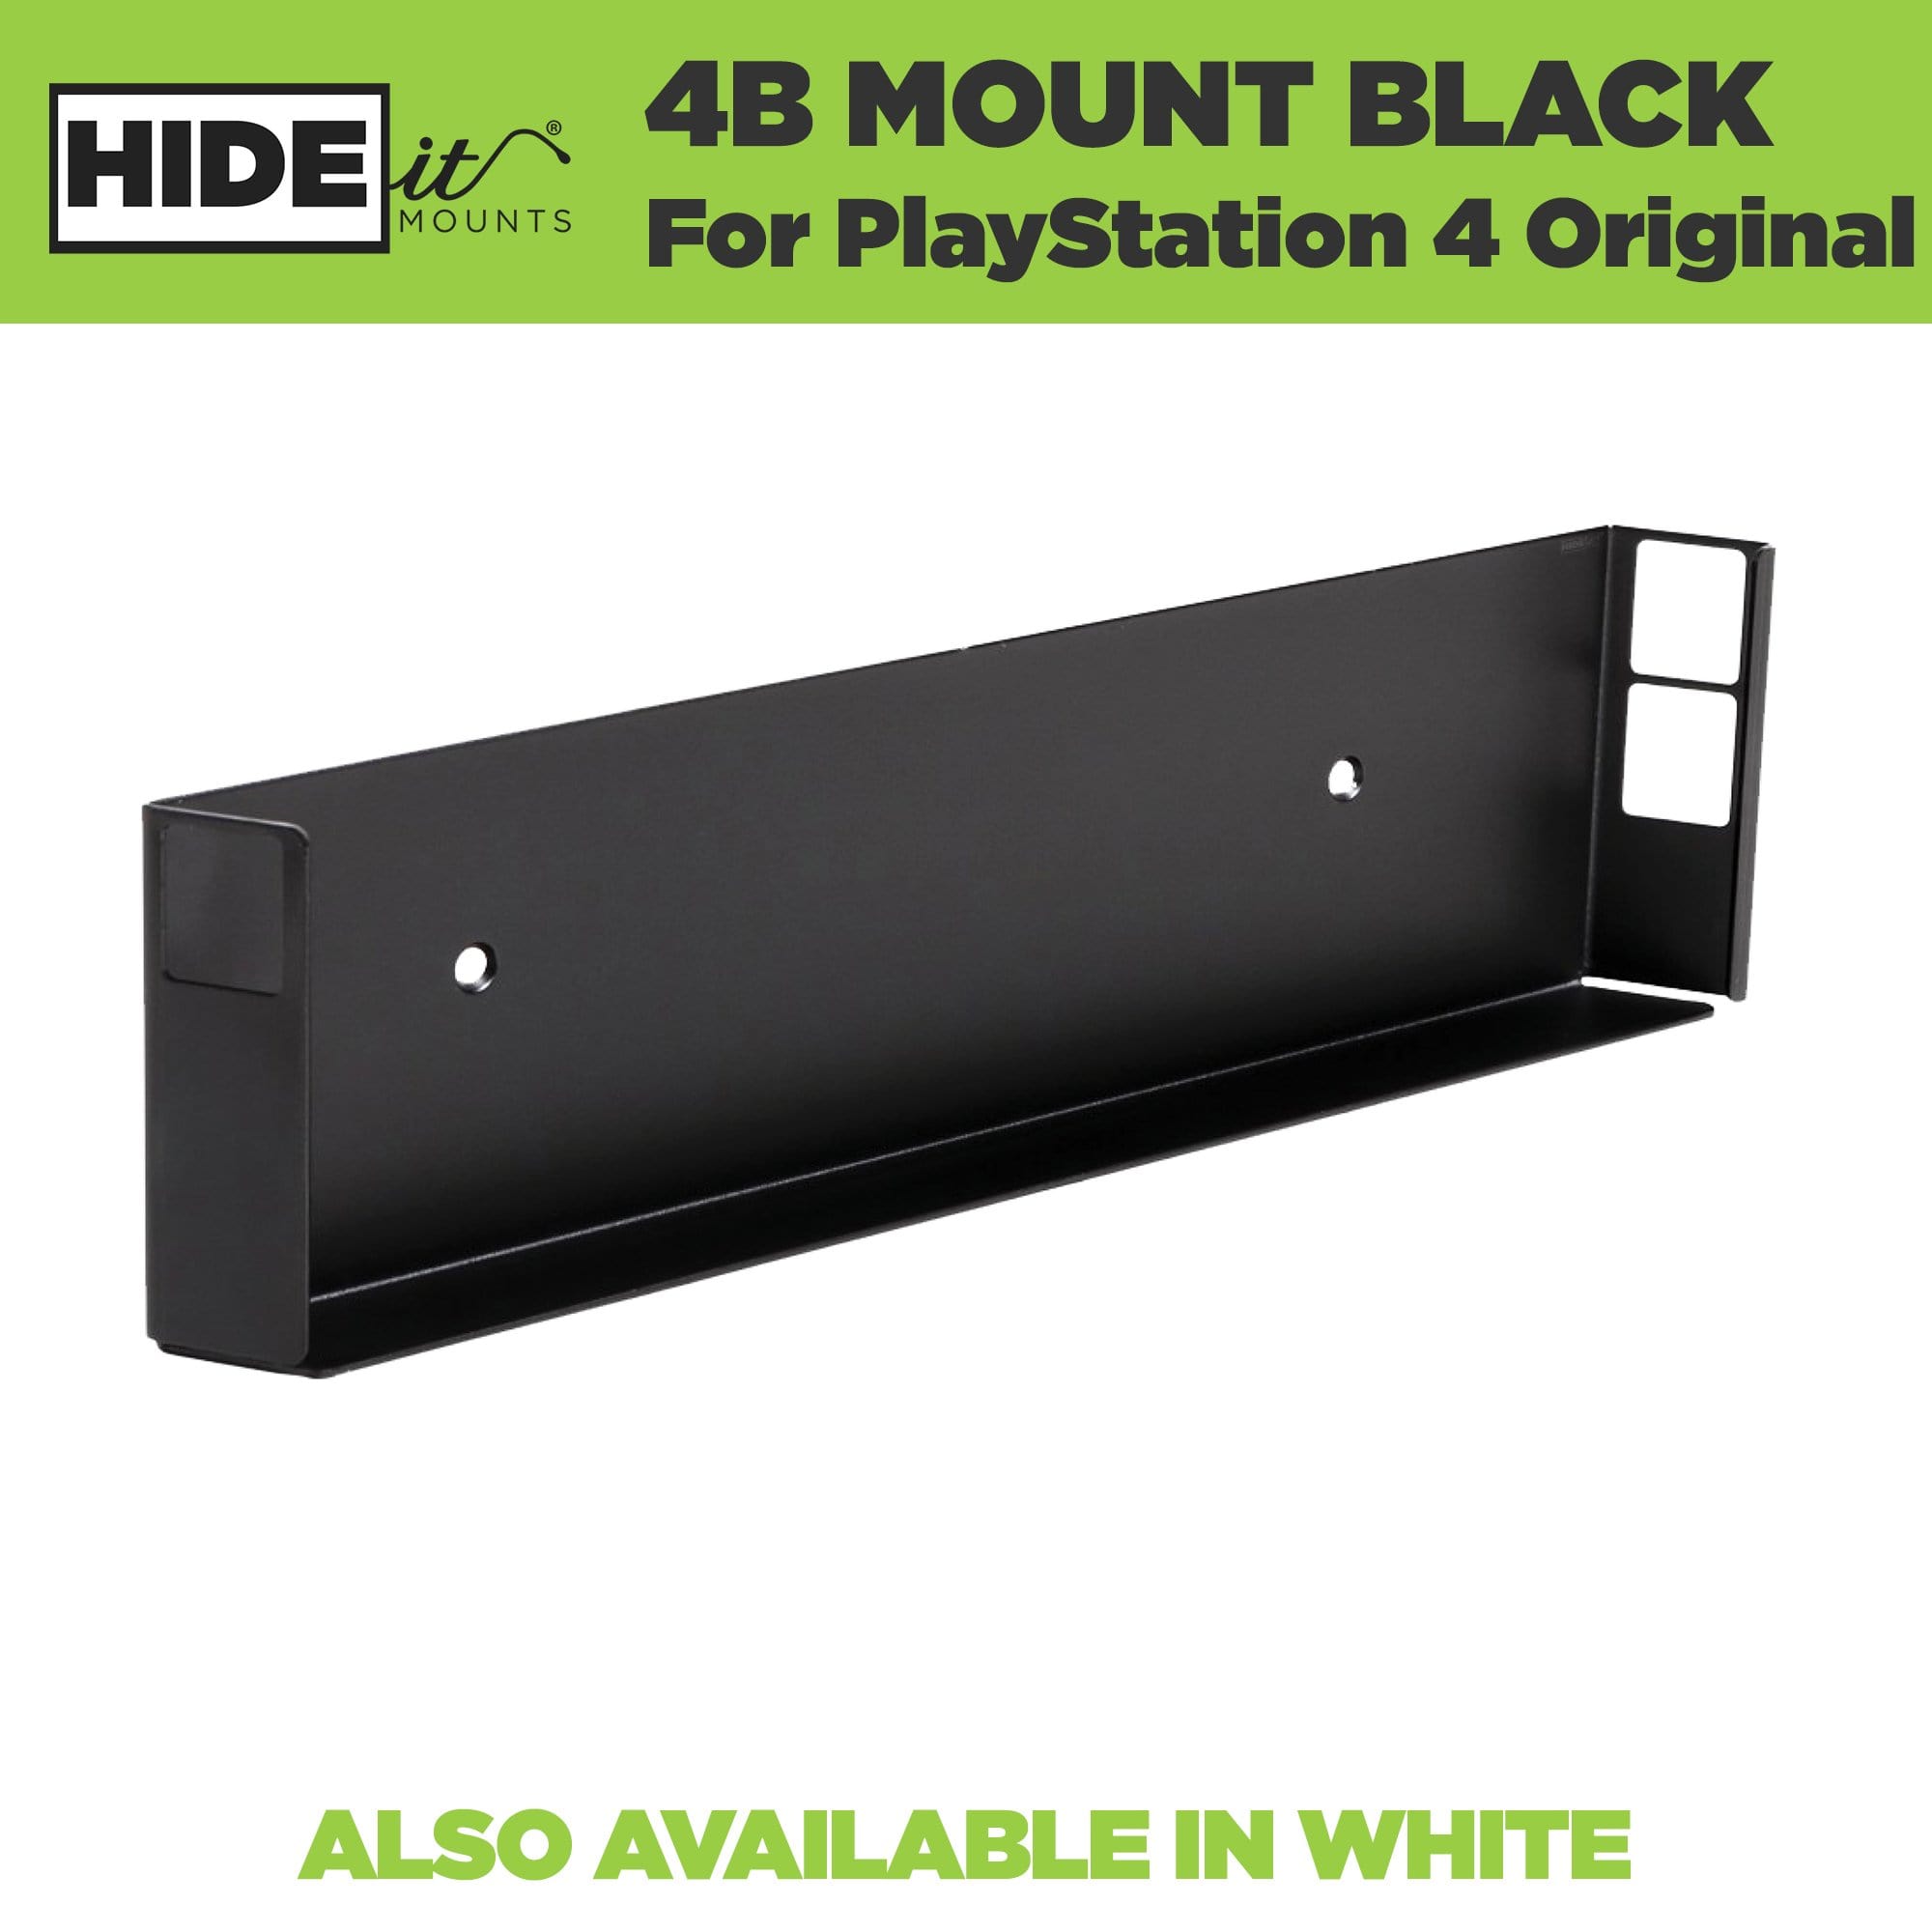 PS4 Wall Mount | HIDEit Mount for 4 Original Game Console – Mounts